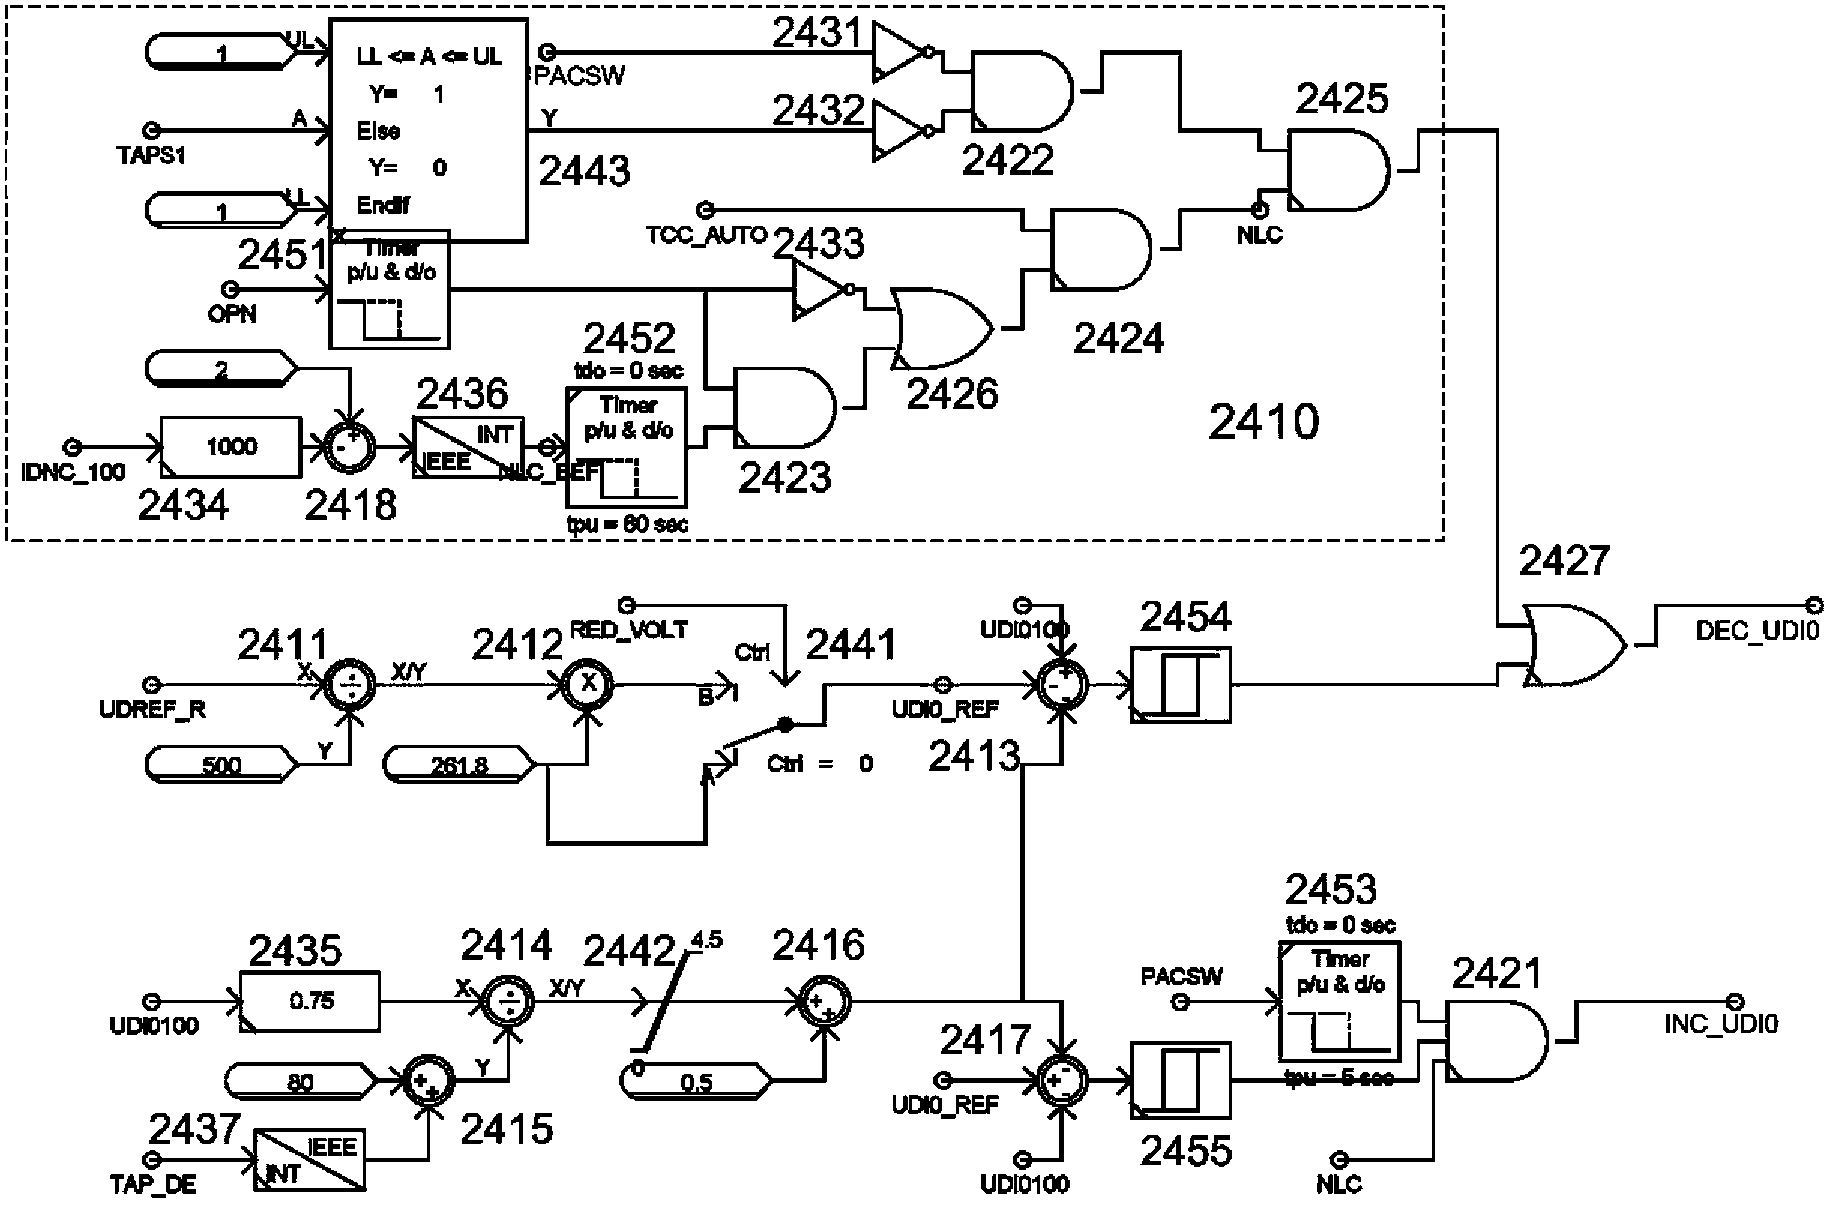 No-load direct current voltage control simulation device